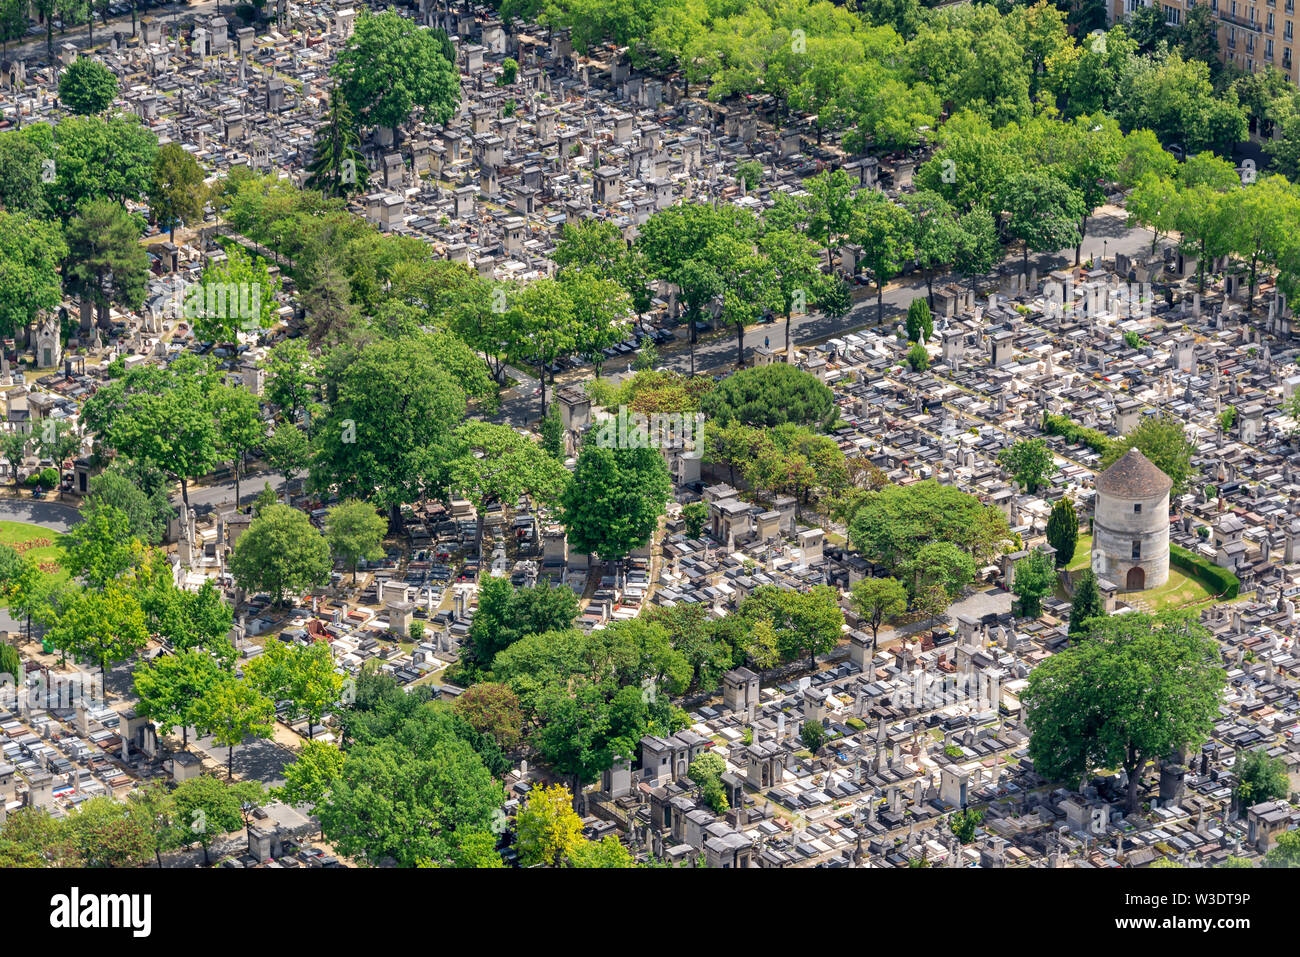 Aerial view of Montparnasse cemetery  in Paris France Stock Photo